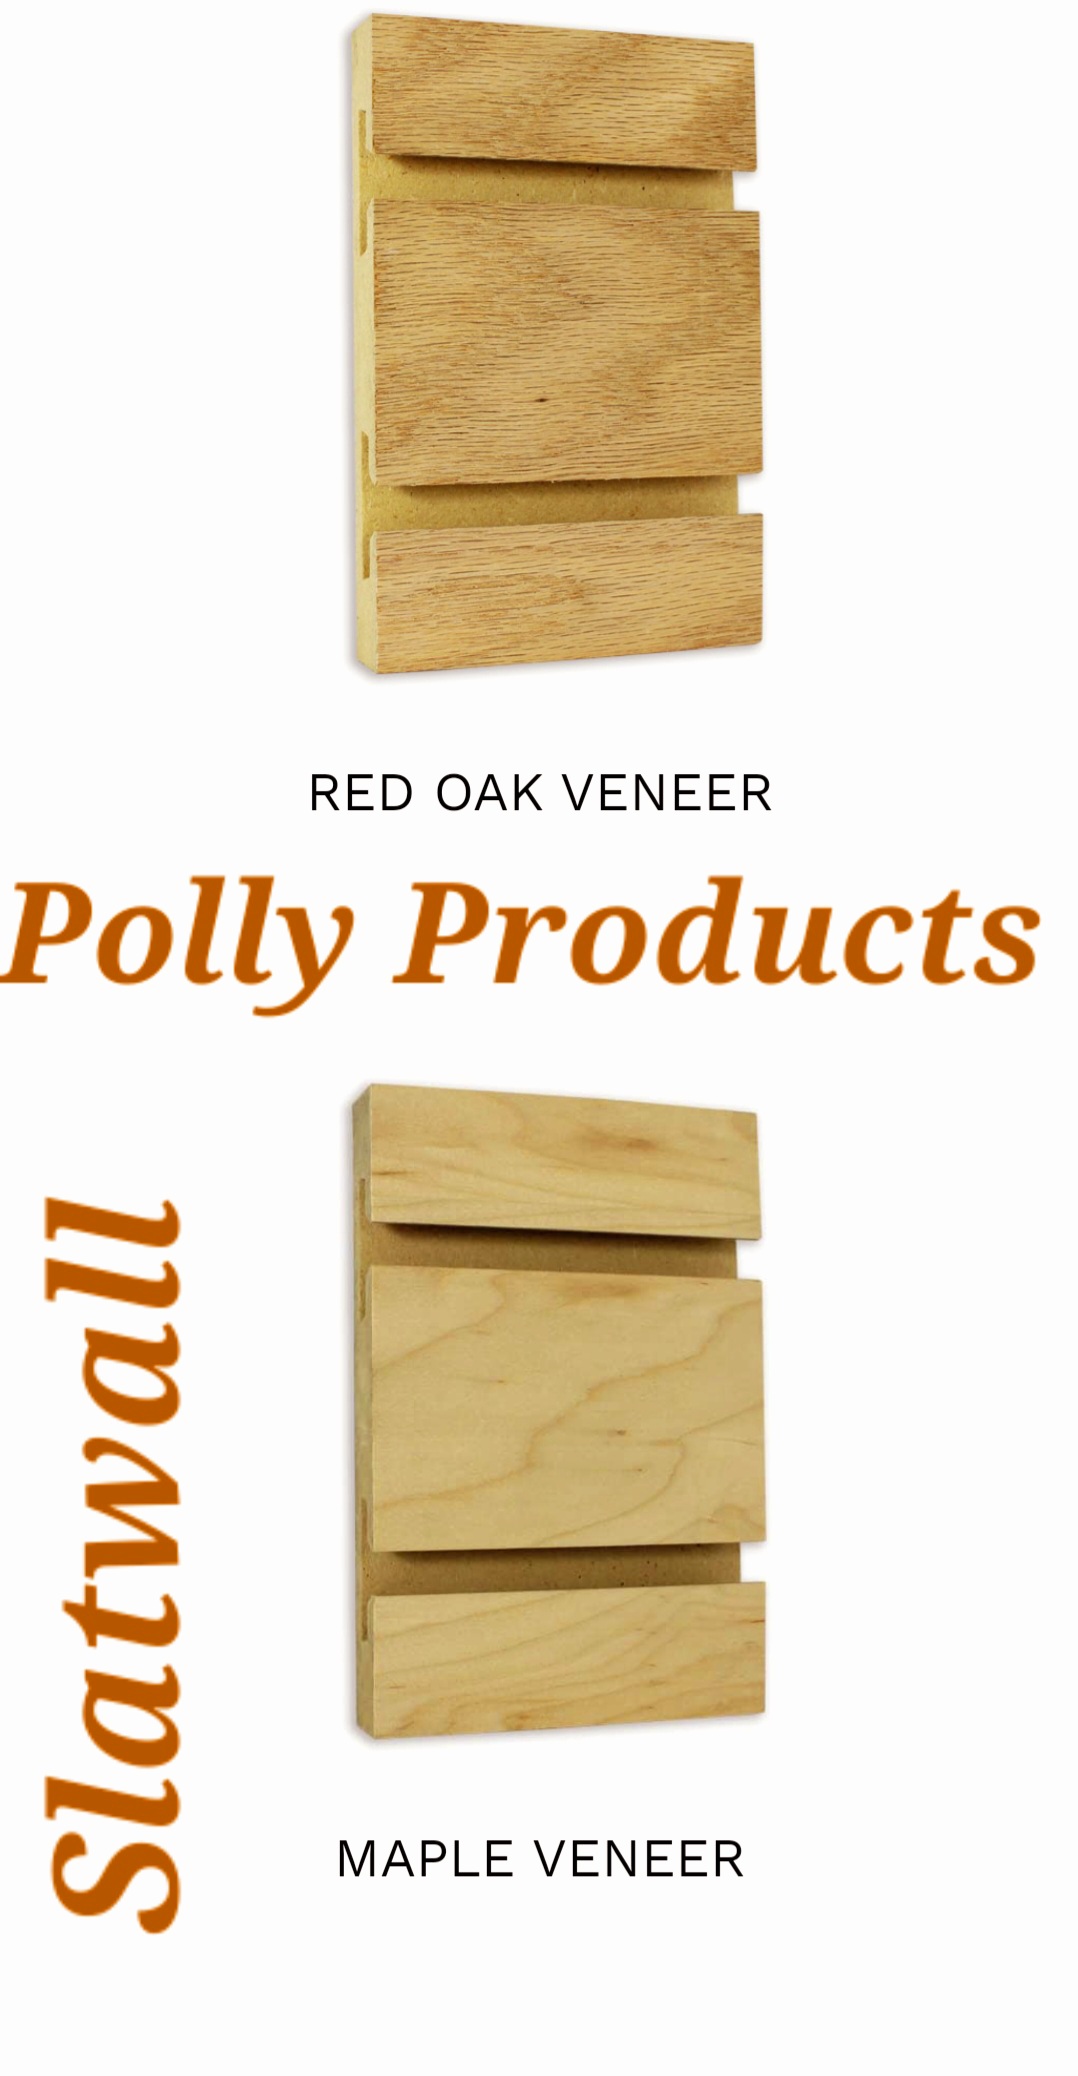 Red Oak and MAPLE Slatwall Polly Products. MADE IN THE USA QUALITY.